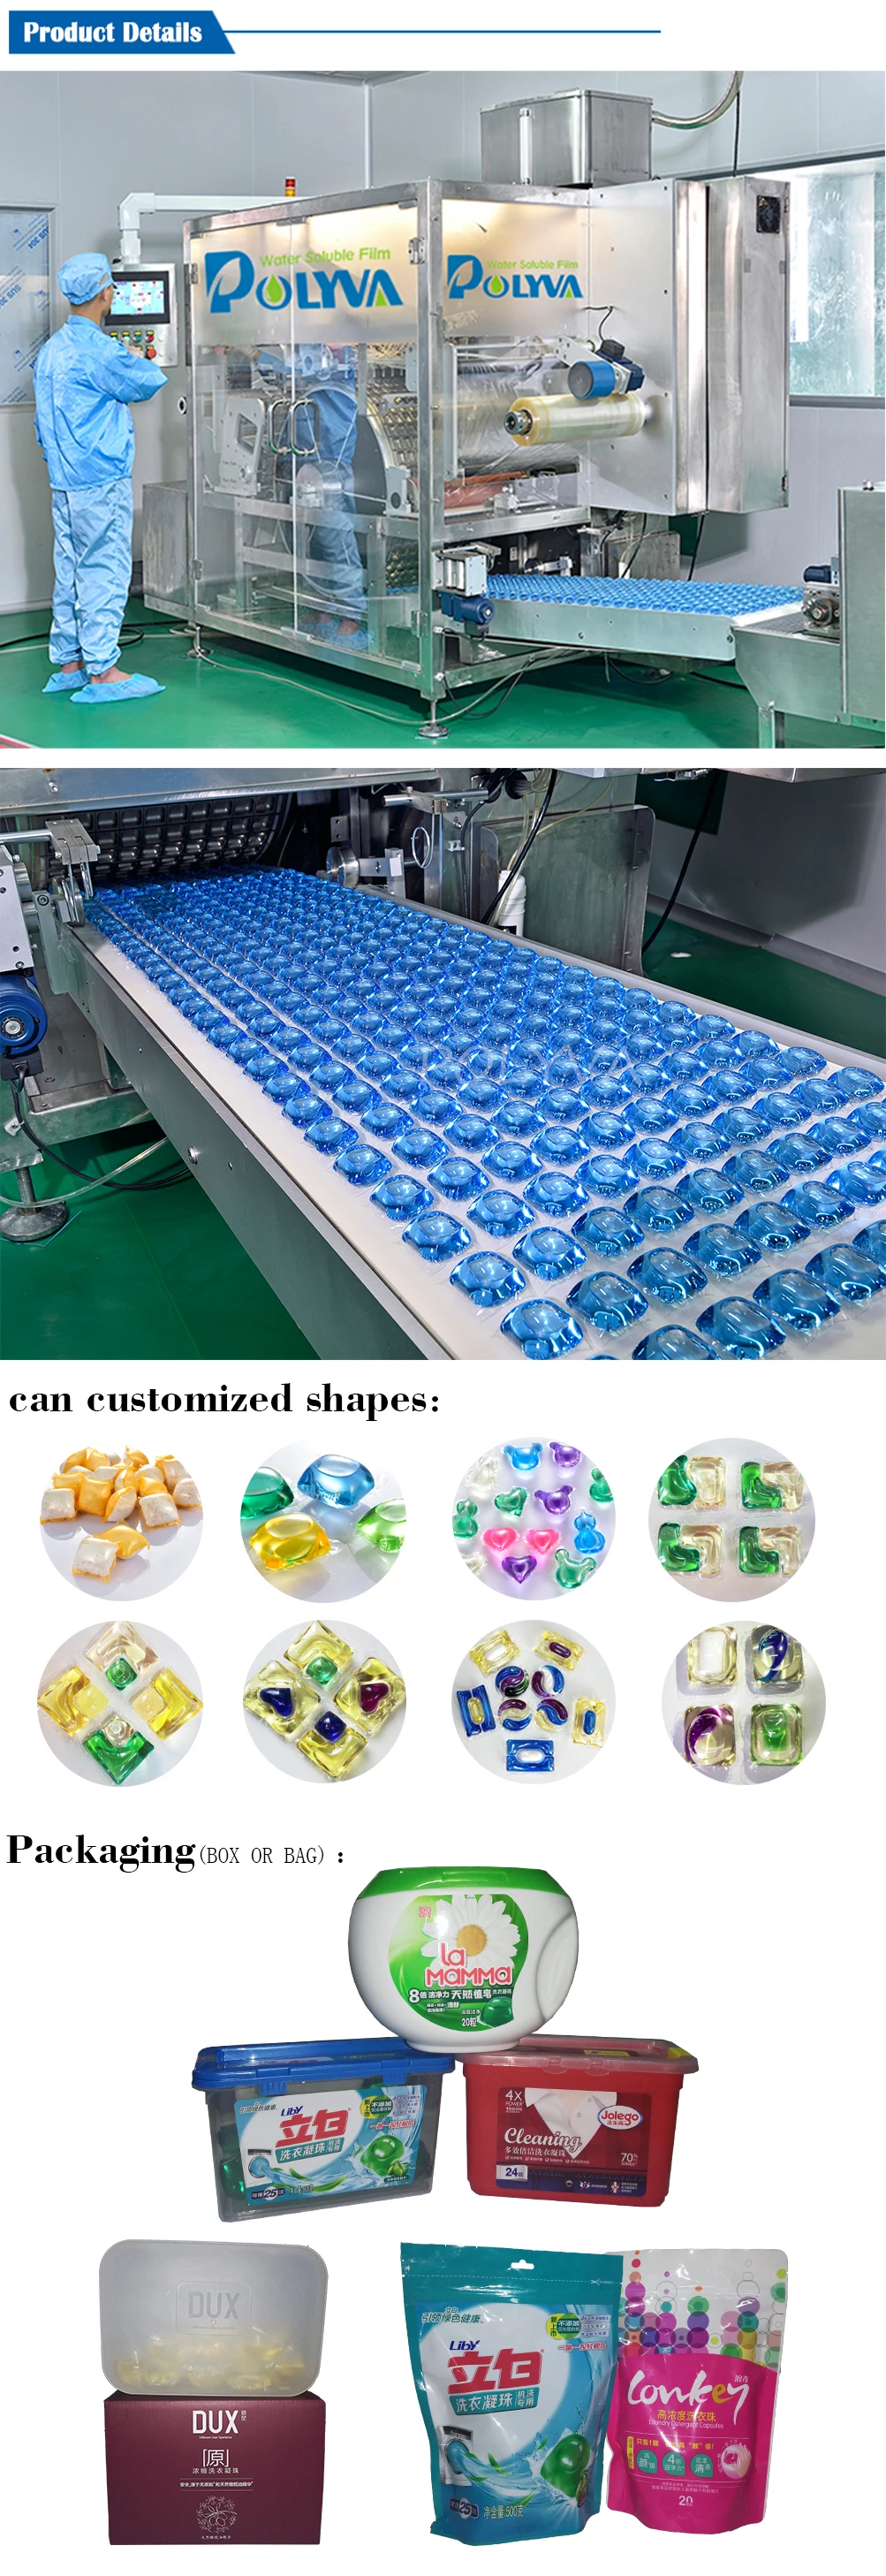 POLYVA laundry pods for factory